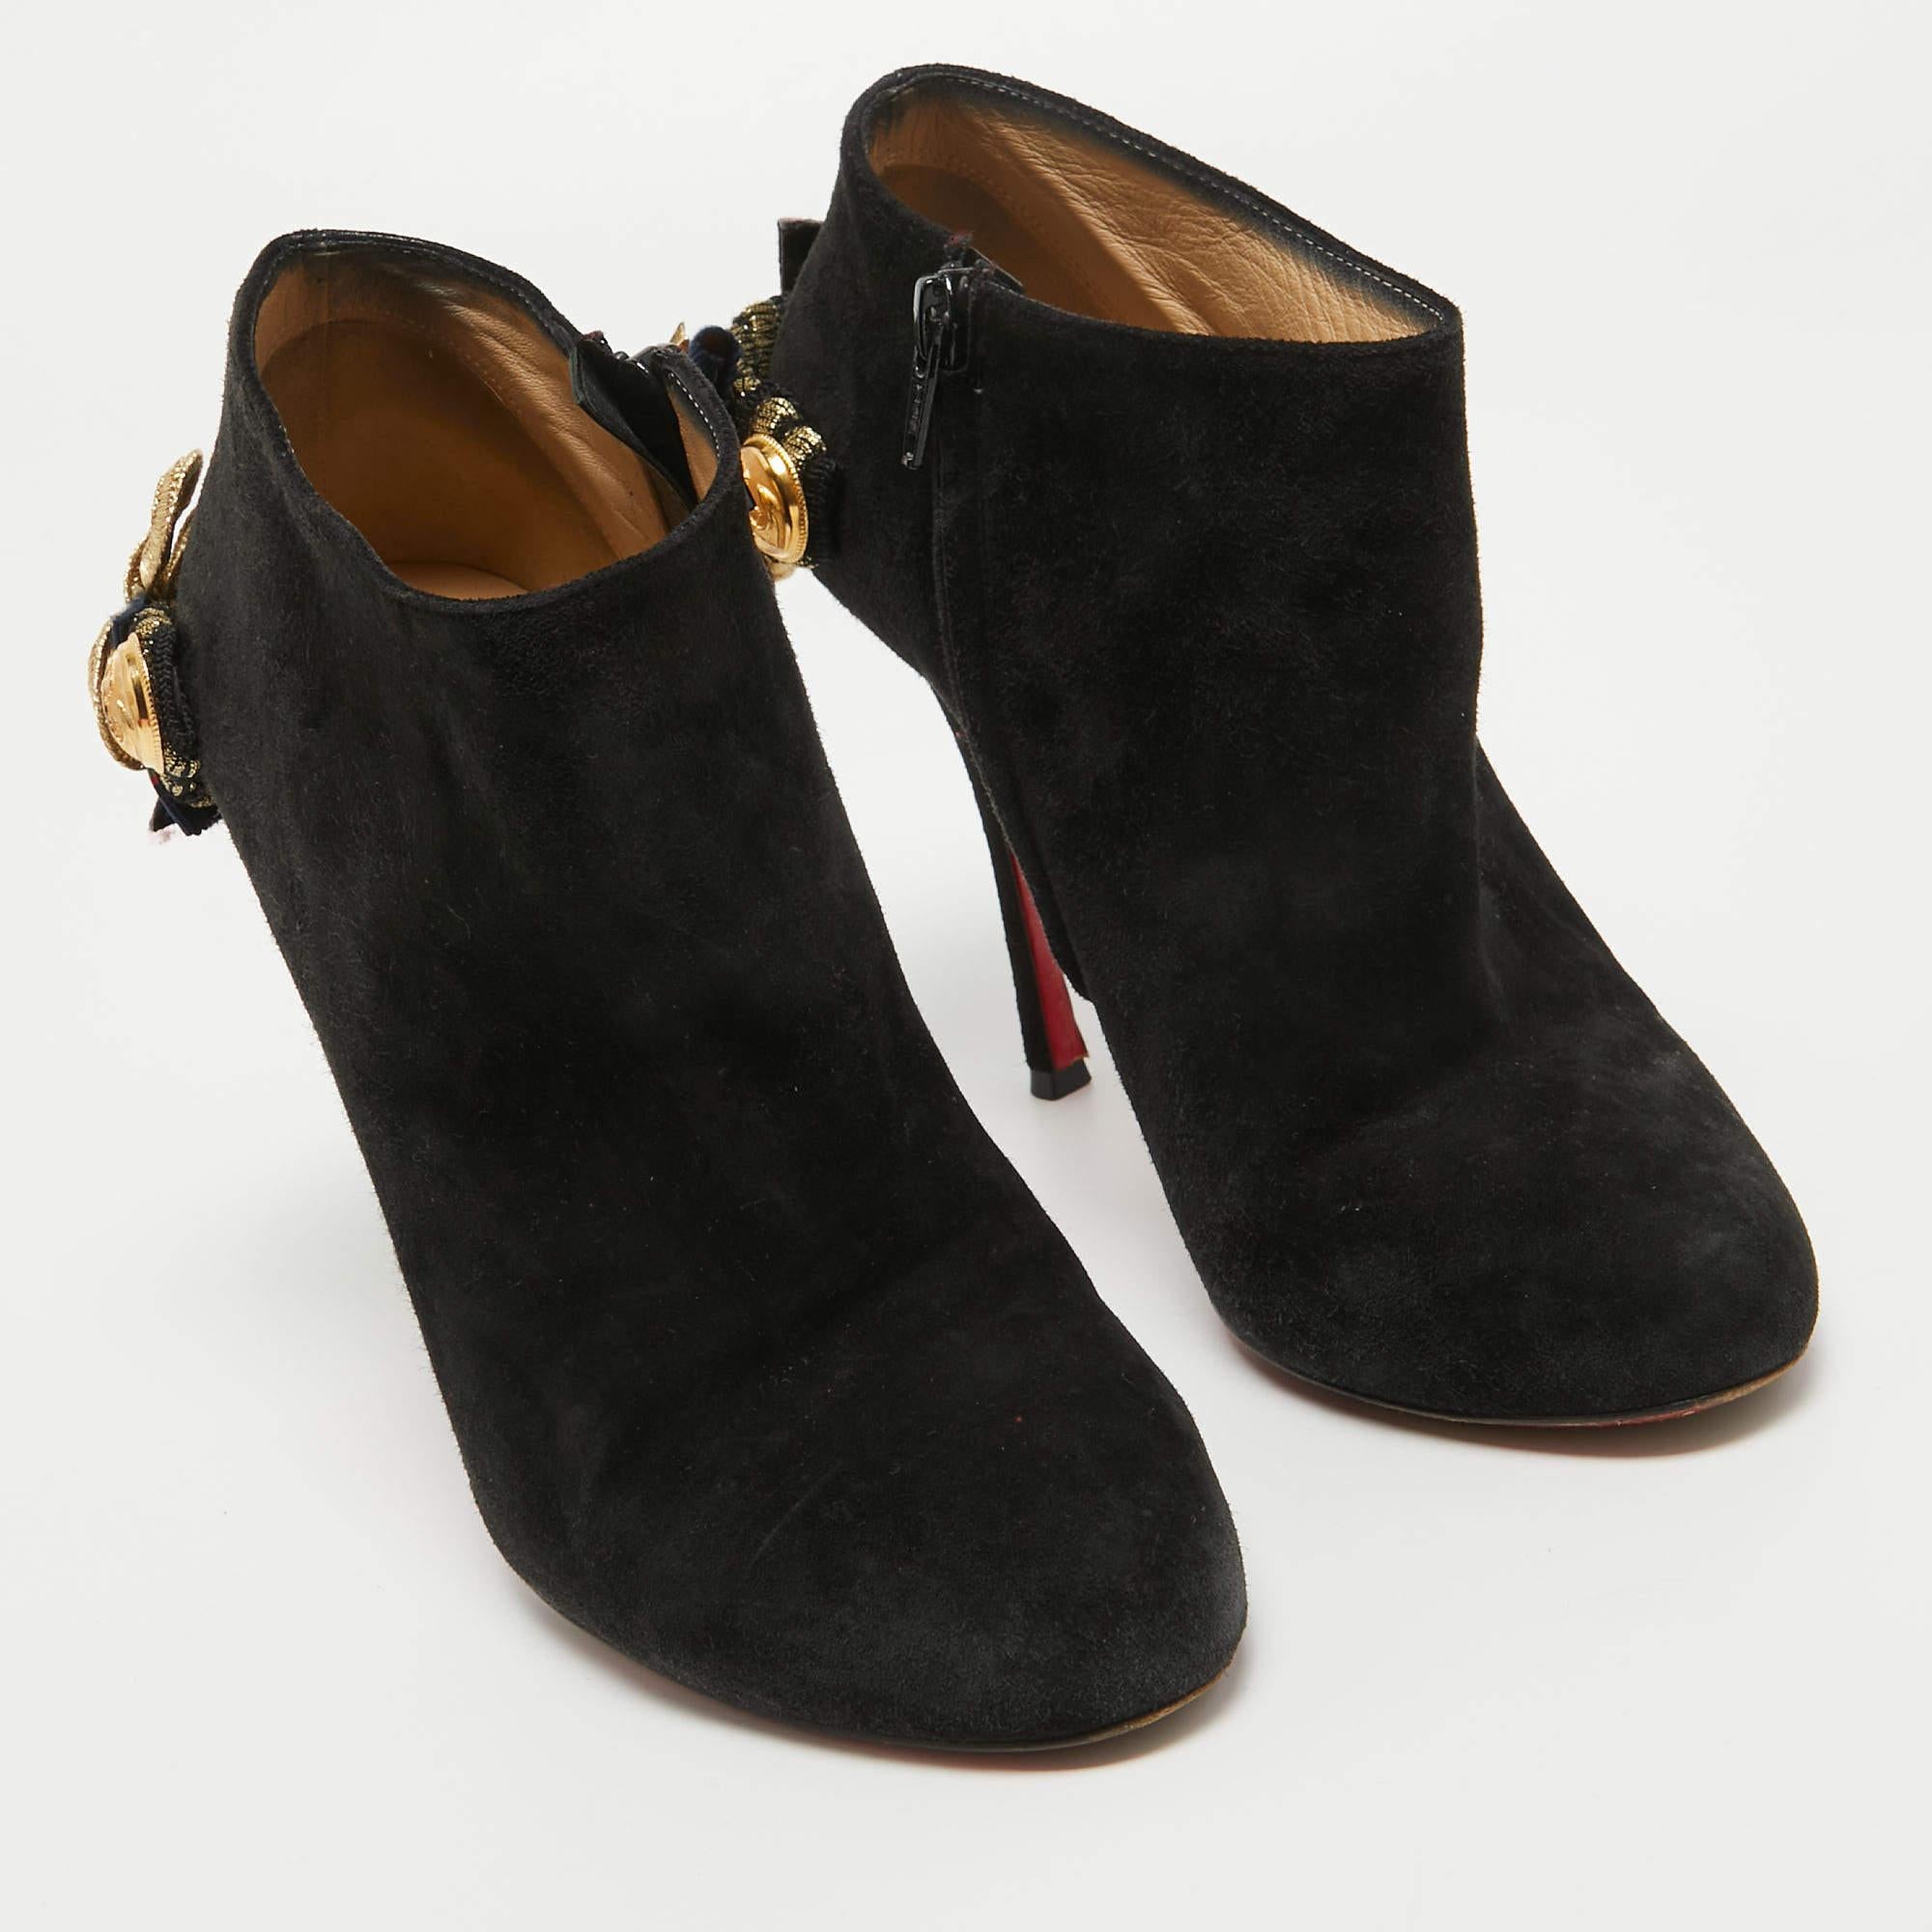 Christian Louboutin Black Suede Galobella Ankle Boots Size 38 For Sale 2